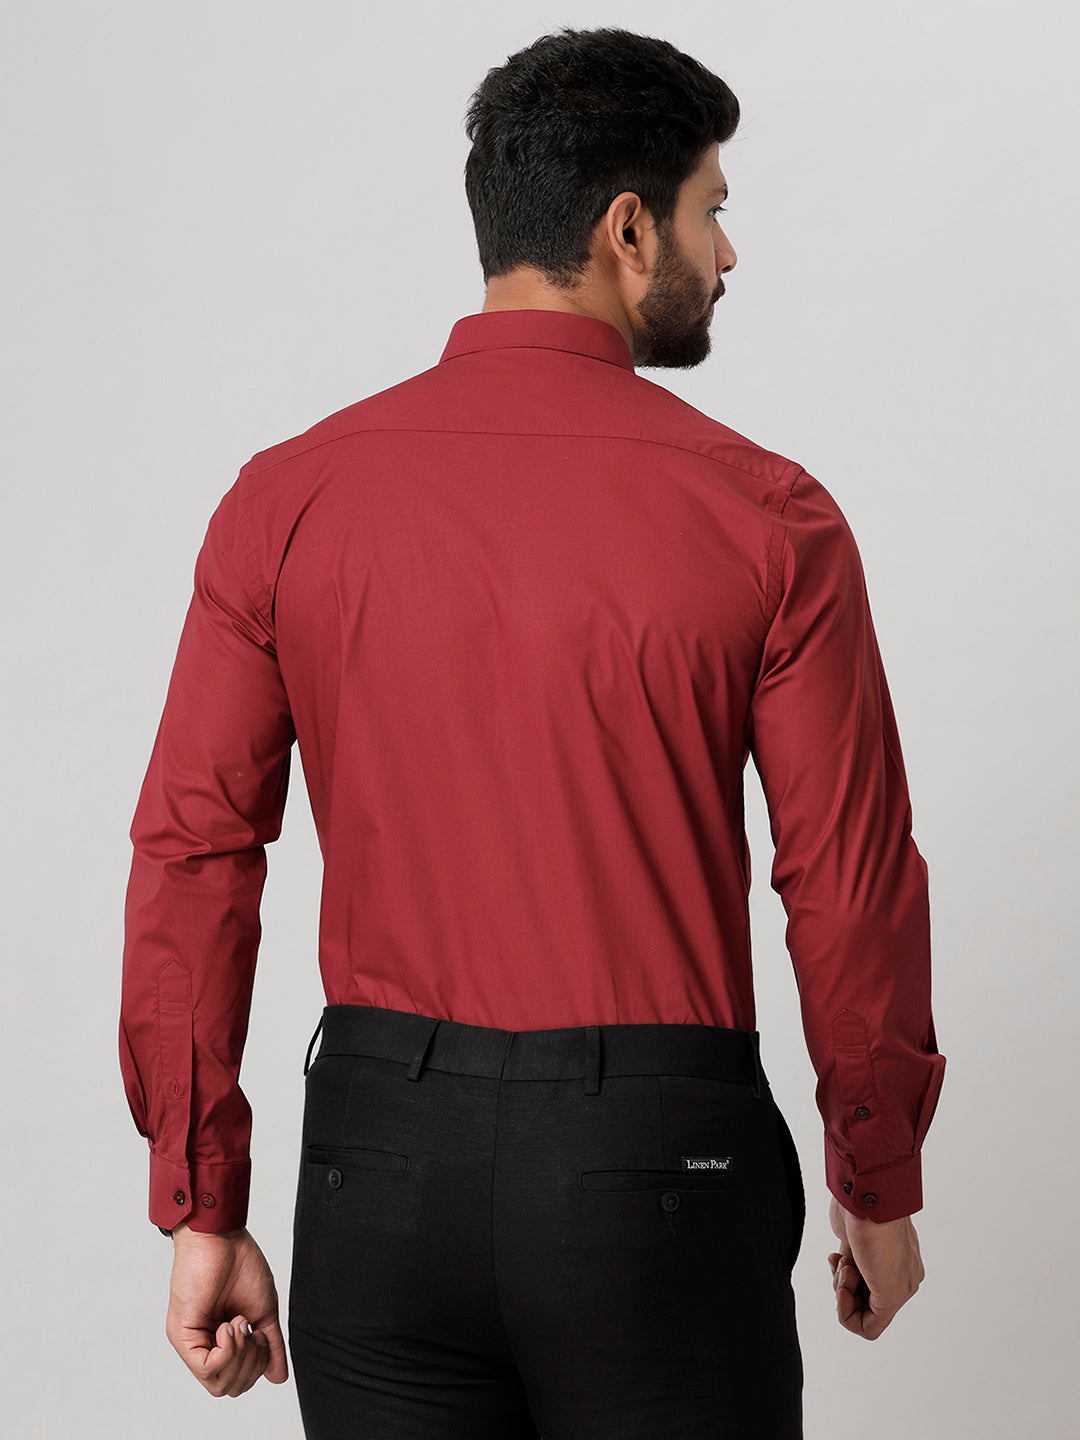 Mens Formal Cotton Spandex 2 Way Stretch Maroon Full Sleeves Shirt LY6-Back view